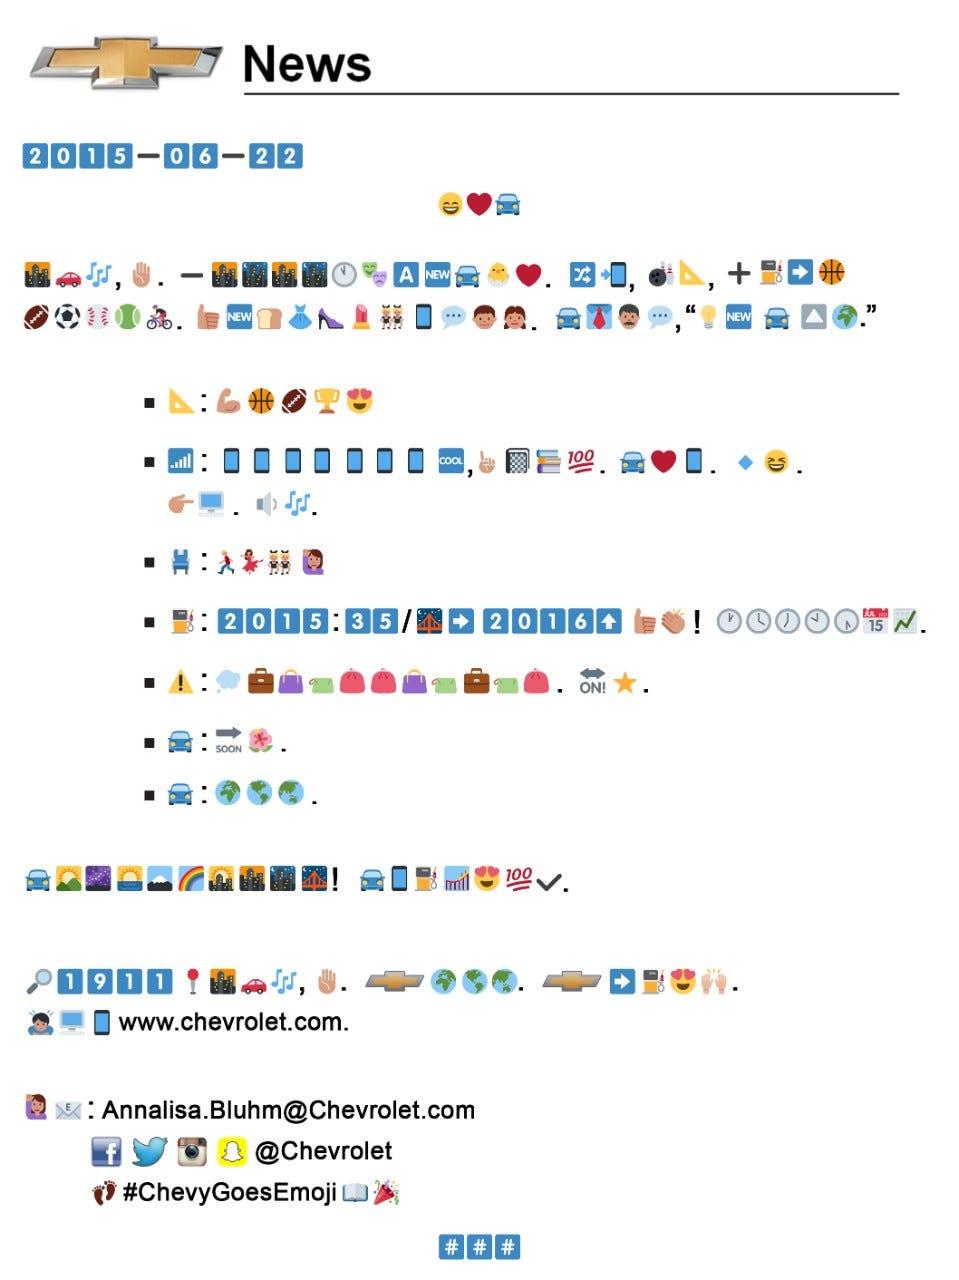 An example of Chevrolet issuing a press release consisting of emoticons only